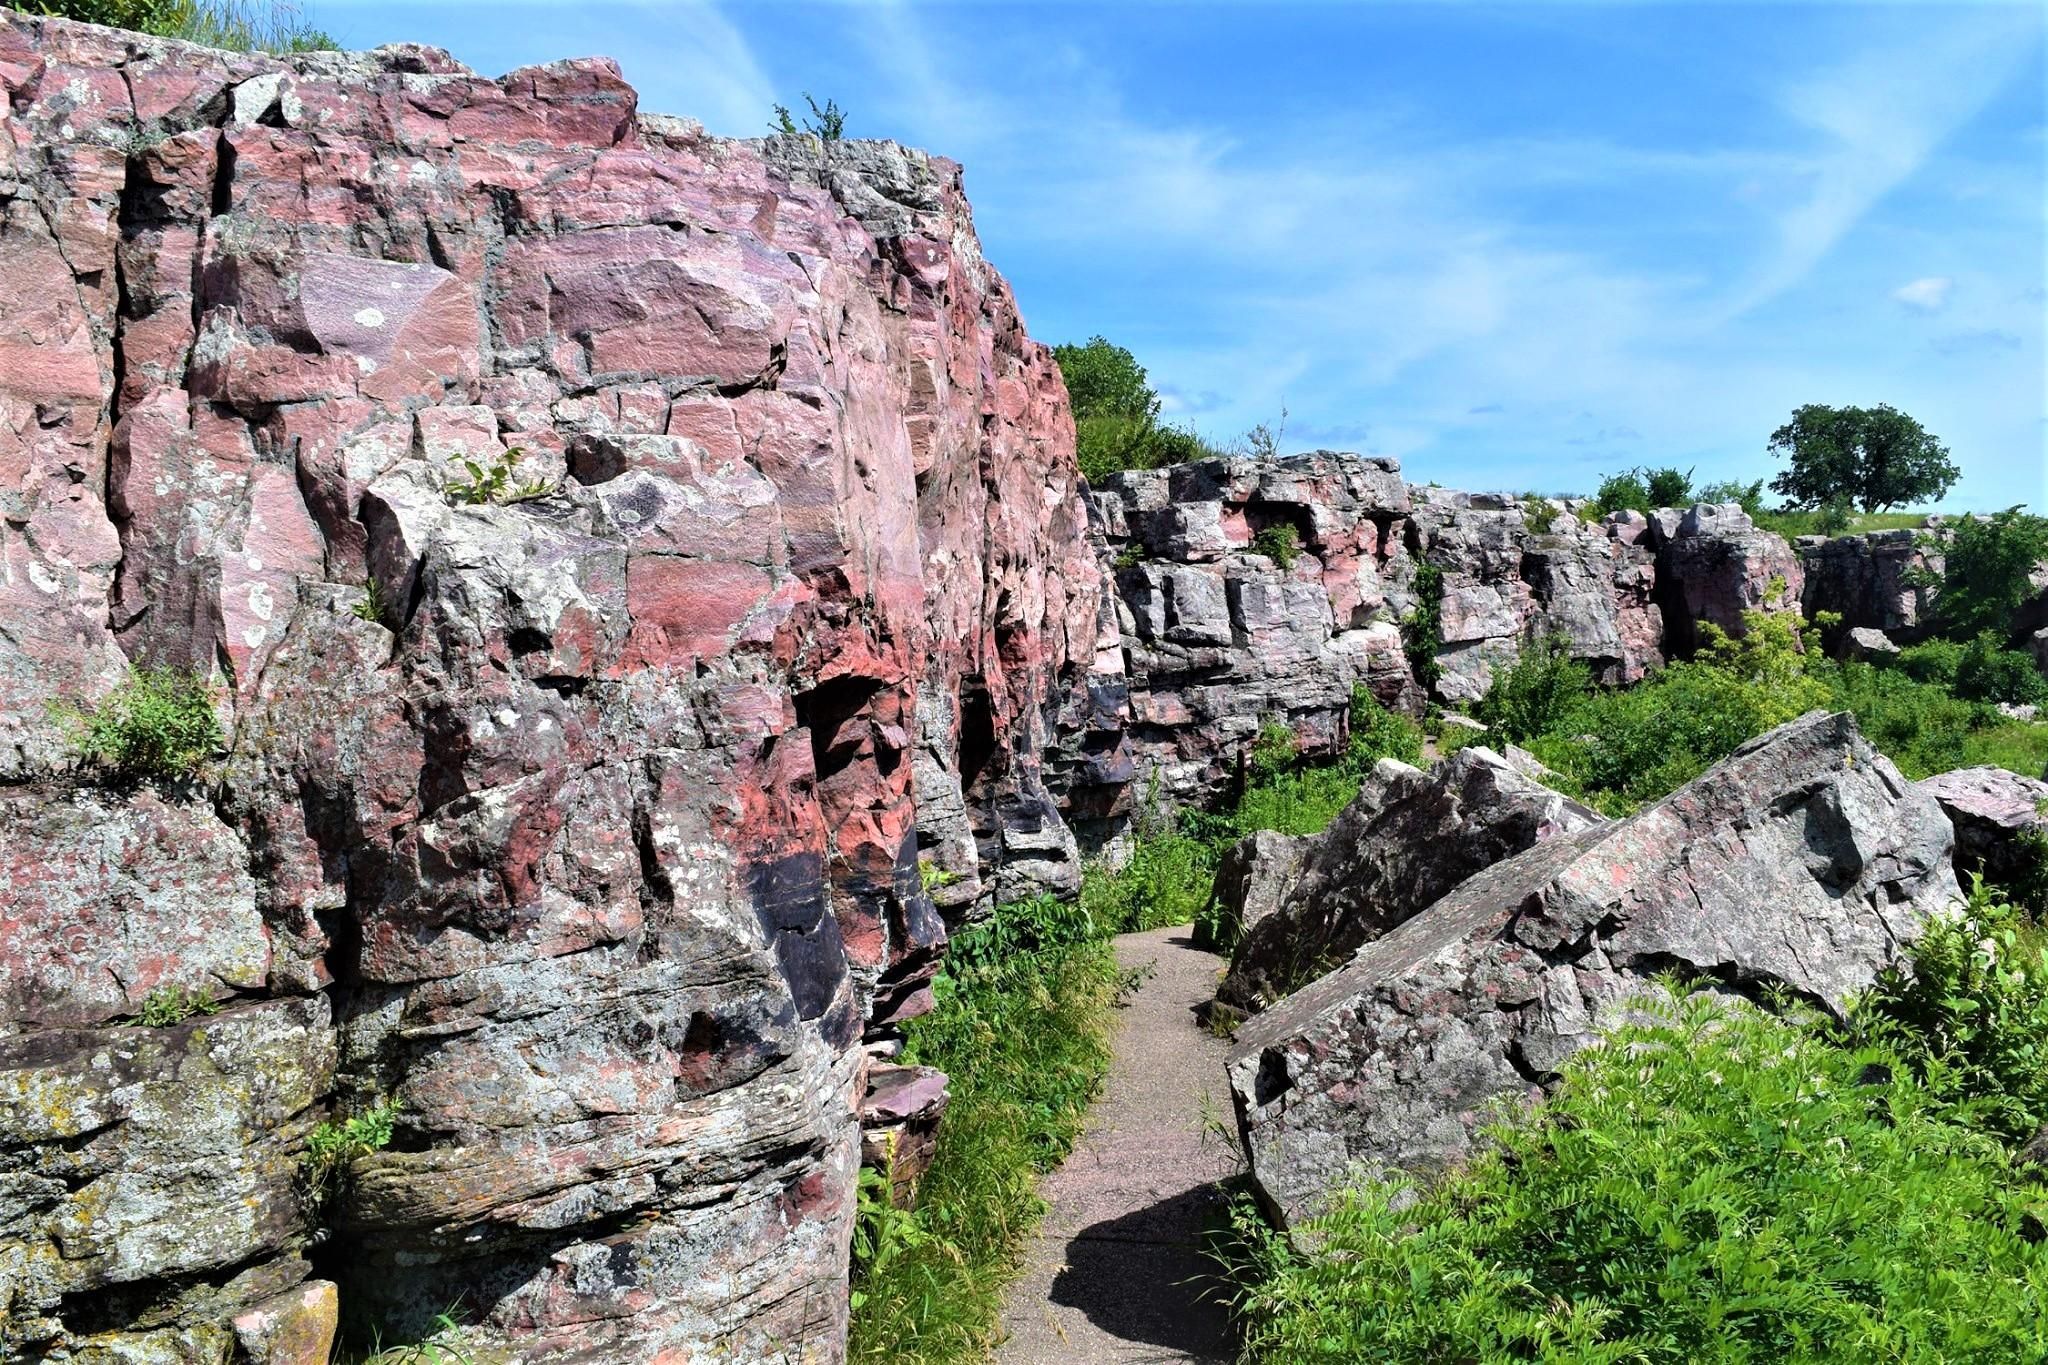 The outcroppings along the trail are a surprise to many visitors expecting a flat prairie